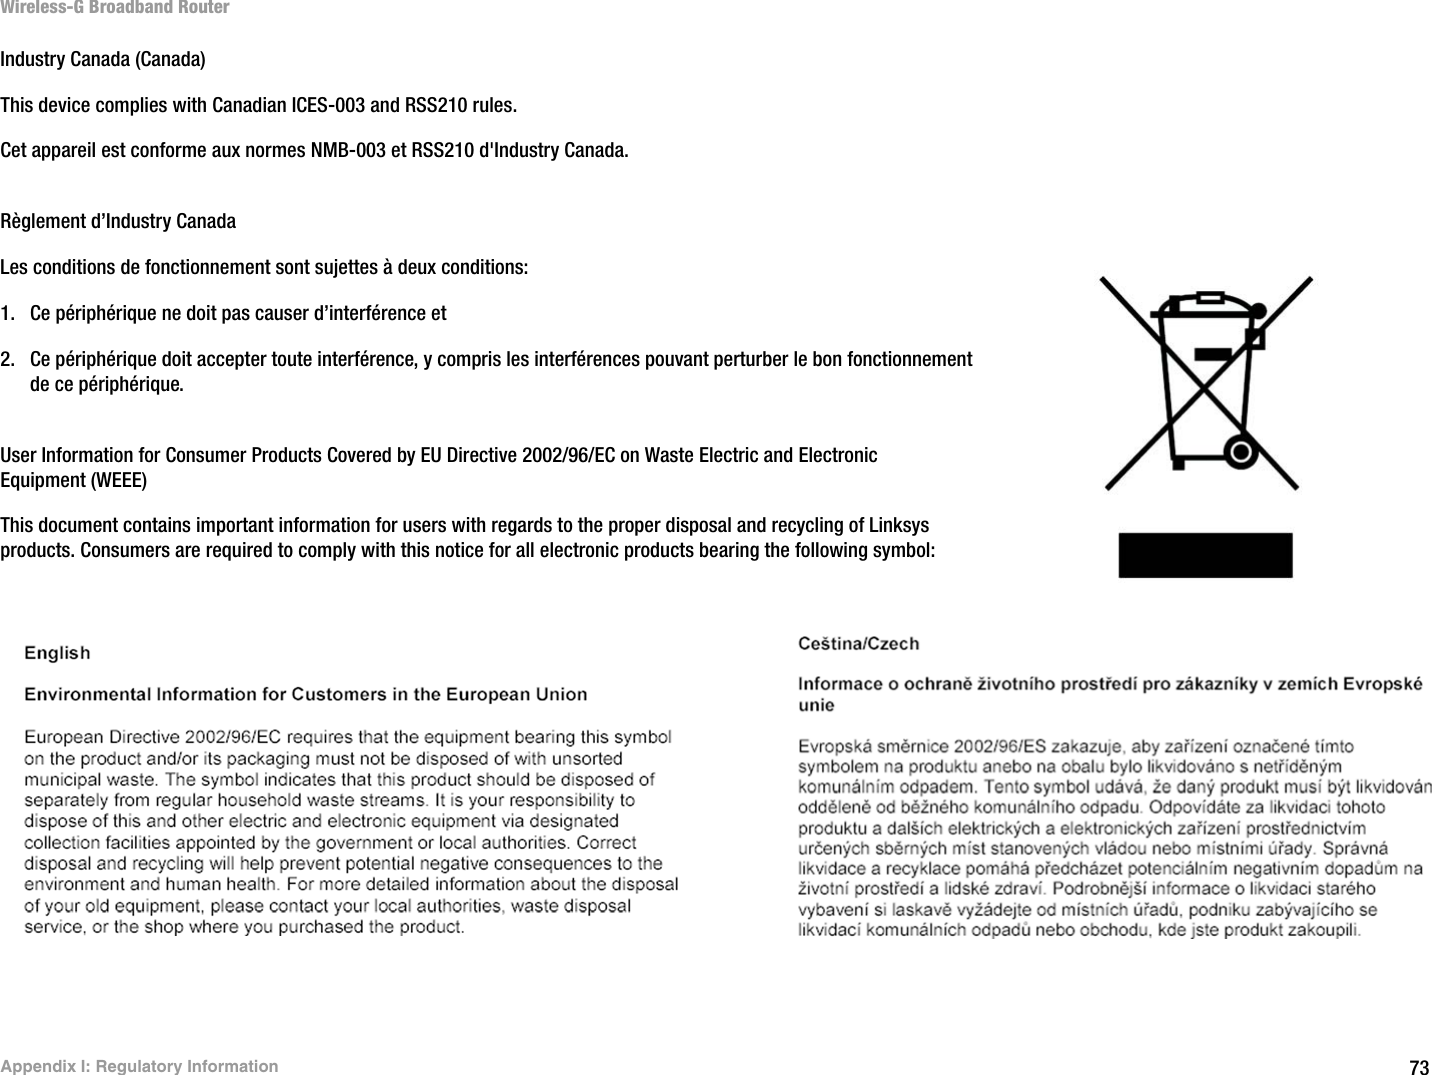 73Appendix I: Regulatory InformationWireless-G Broadband RouterIndustry Canada (Canada)This device complies with Canadian ICES-003 and RSS210 rules.Cet appareil est conforme aux normes NMB-003 et RSS210 d&apos;Industry Canada.Règlement d’Industry Canada Les conditions de fonctionnement sont sujettes à deux conditions:1. Ce périphérique ne doit pas causer d’interférence et2. Ce périphérique doit accepter toute interférence, y compris les interférences pouvant perturber le bon fonctionnement de ce périphérique.User Information for Consumer Products Covered by EU Directive 2002/96/EC on Waste Electric and Electronic Equipment (WEEE)This document contains important information for users with regards to the proper disposal and recycling of Linksys products. Consumers are required to comply with this notice for all electronic products bearing the following symbol: